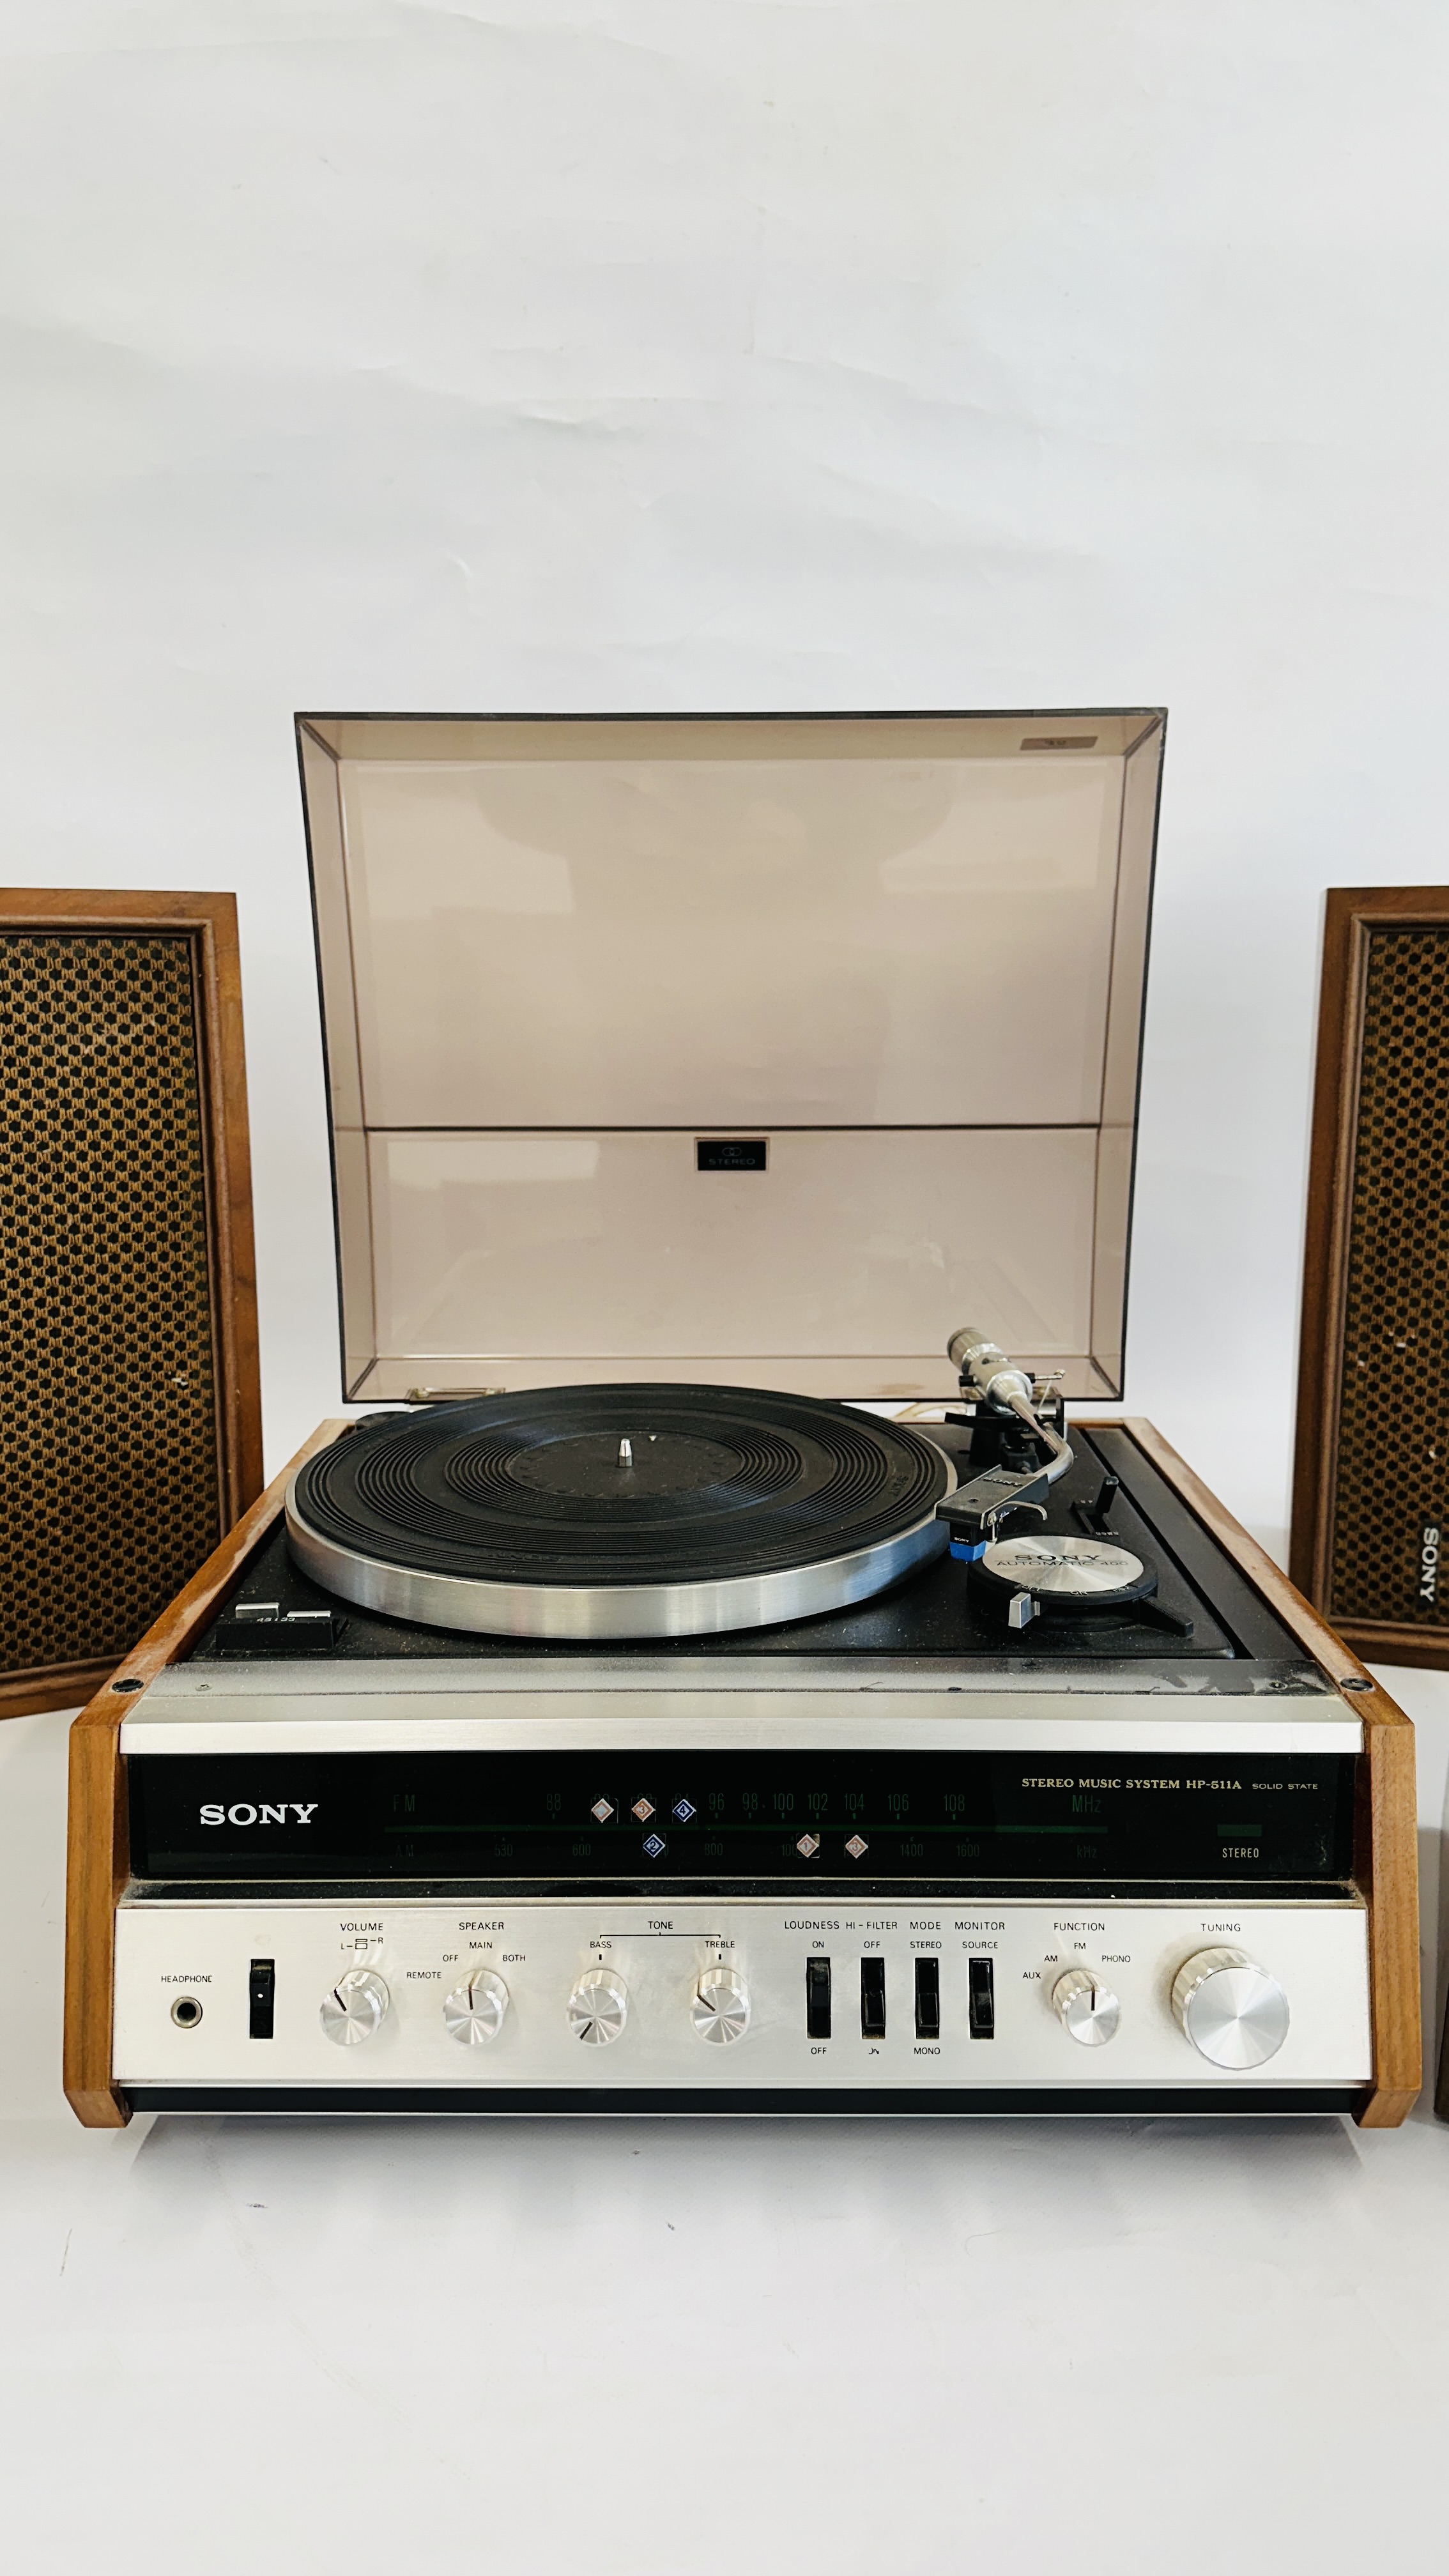 RETRO SONY STEREO MUSIC SYSTEM MODEL HP-511A COMPLETE WITH SONY SS-510 SPEAKER SYSTEM AND SONY - Image 3 of 9